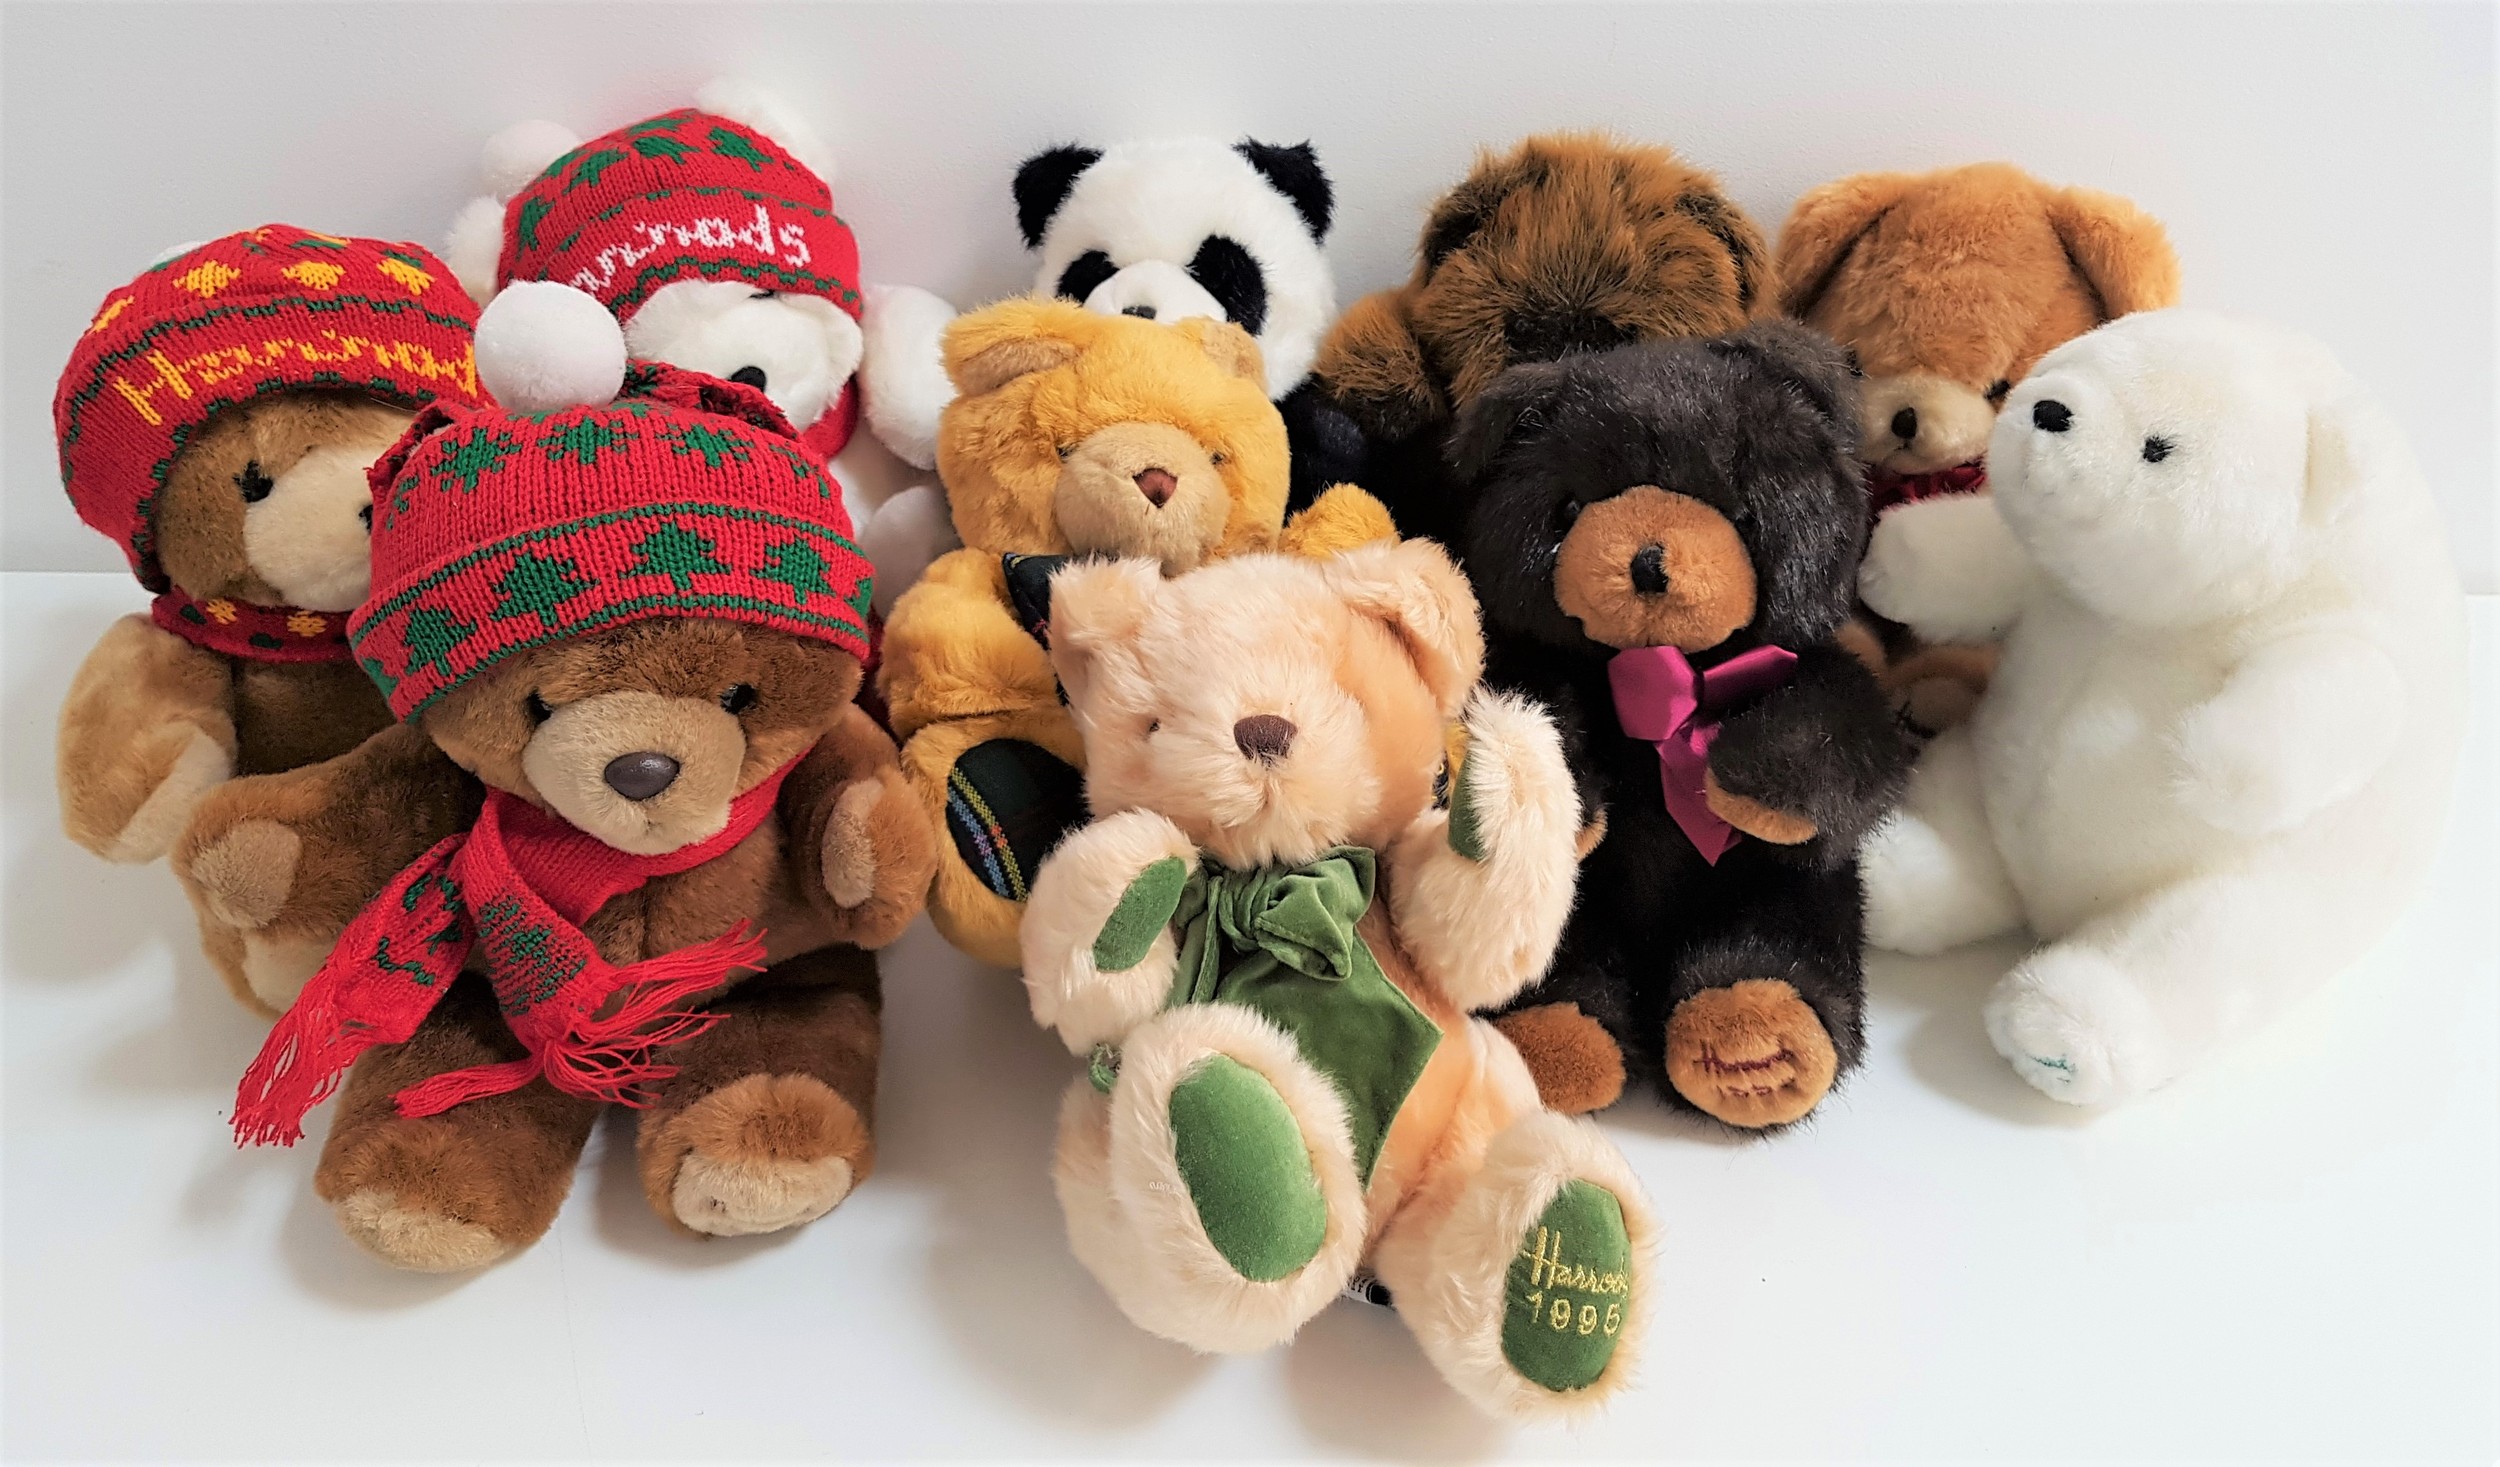 SET OF TEN HARRODS BEARS from 1986, 1987, 1988, 1989, 1990, 1991, 1992, 1993, 1994 and 1995 (10)